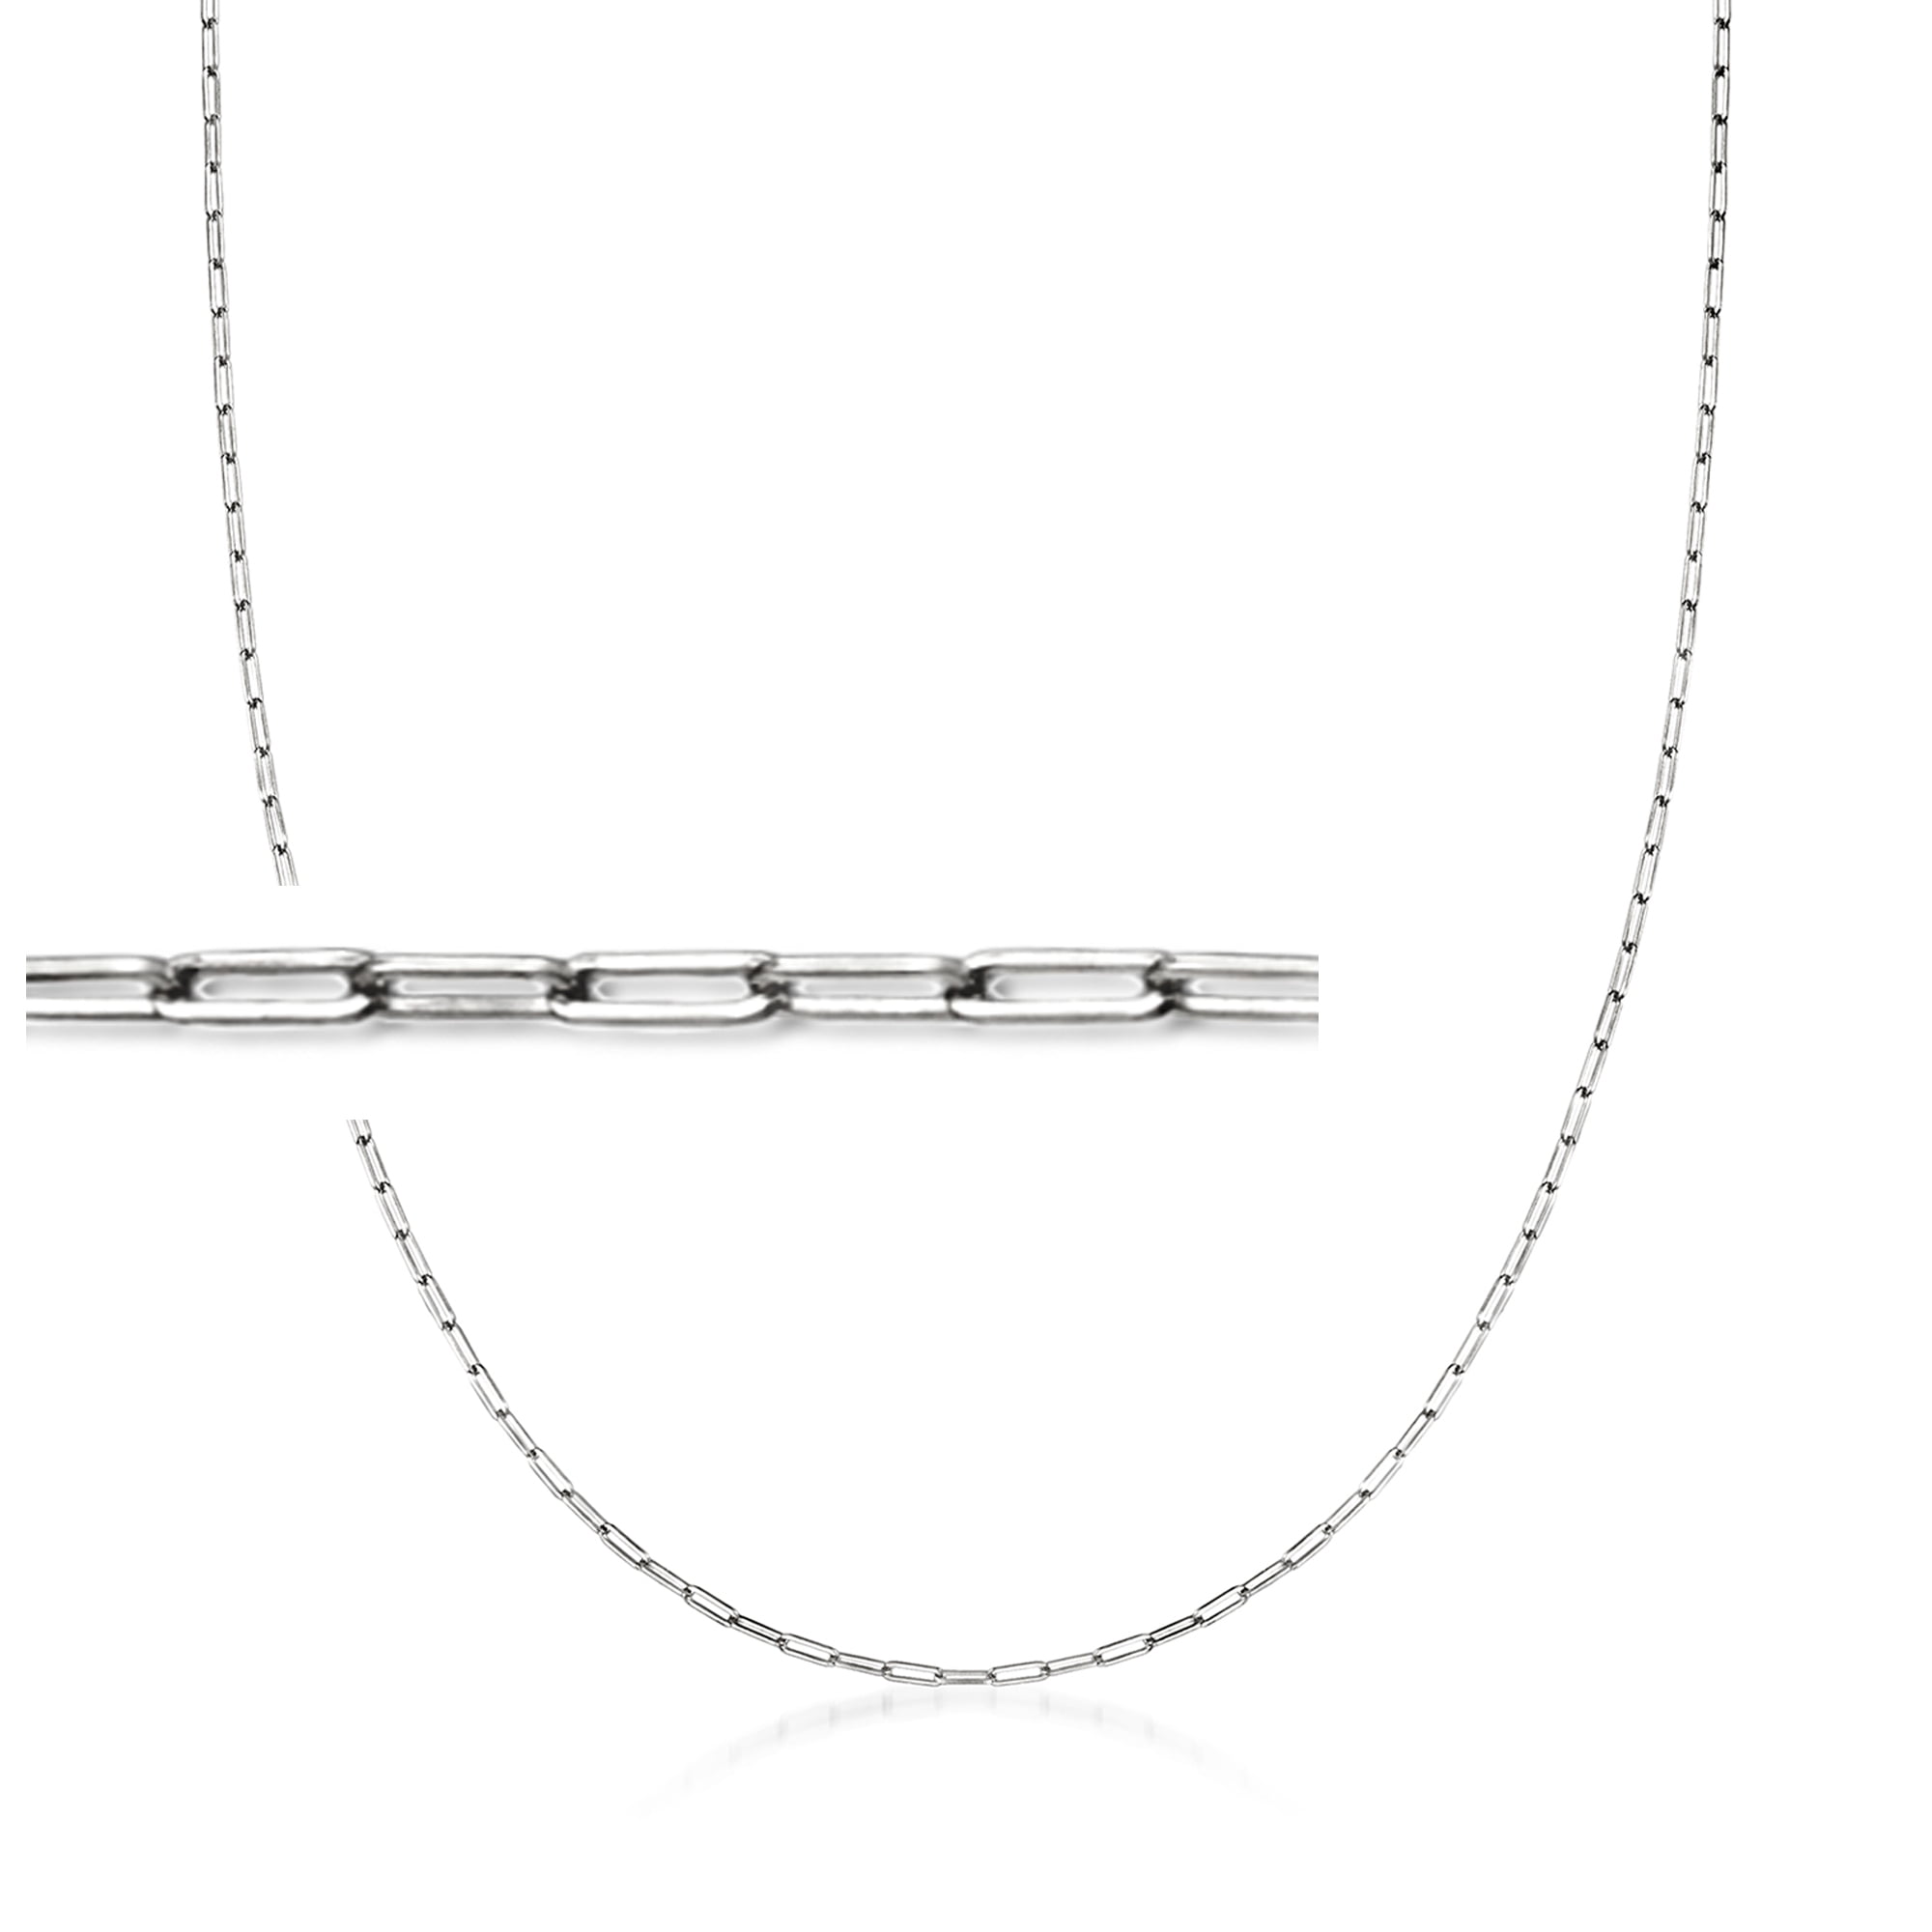 SuperJeweler Silver Tone Layer Necklace Clasp for Up To 3 Necklaces! for  Women 